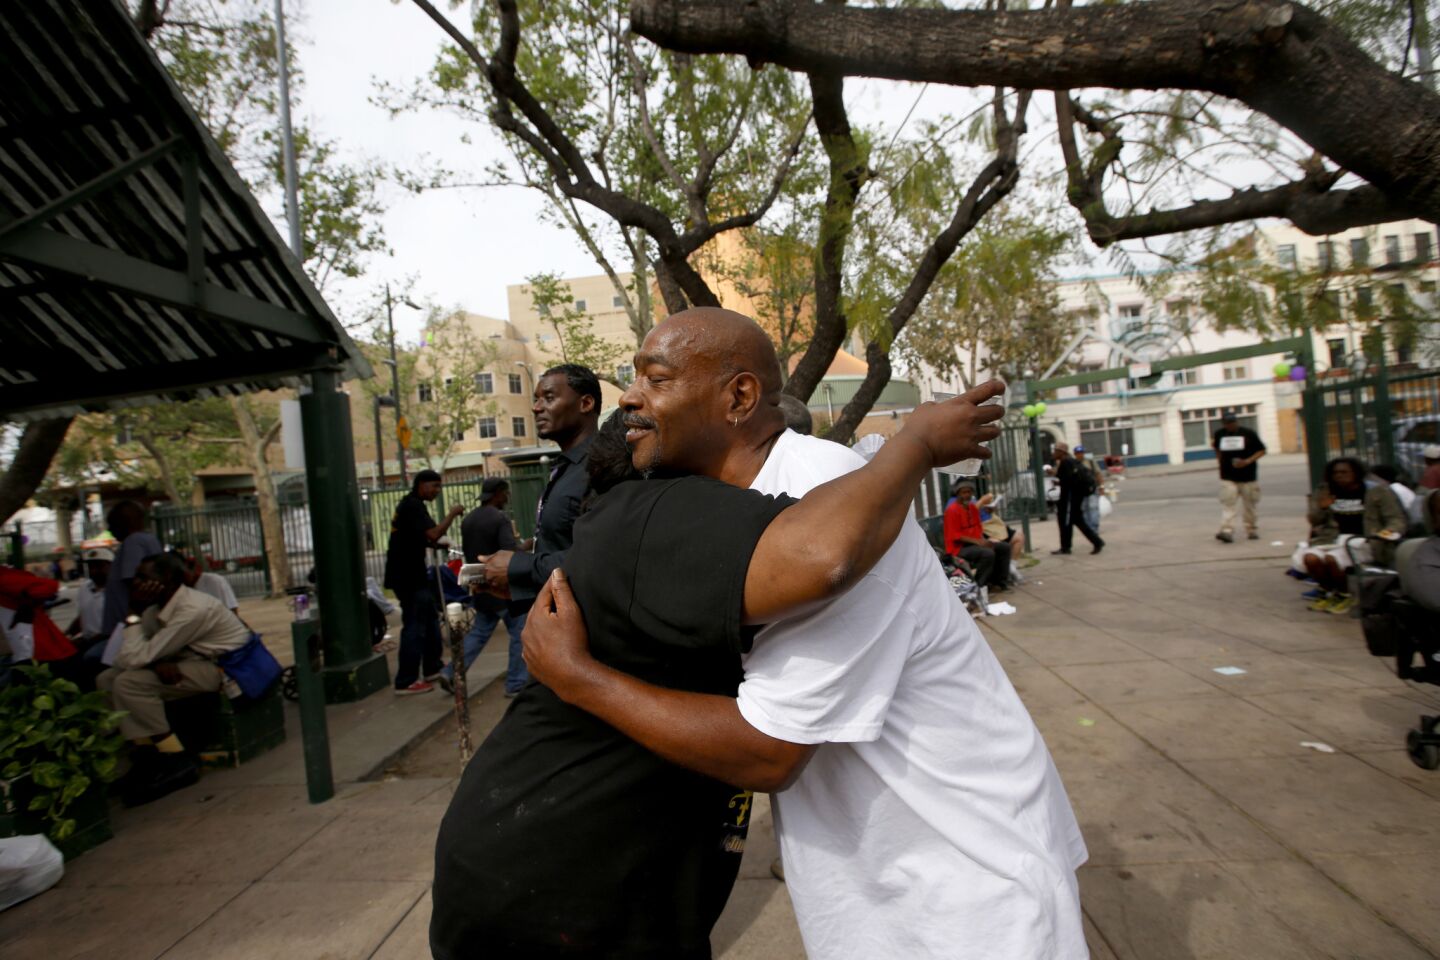 Cocoa Sherry Write, left, and Twin Skid Row, right, hug in San Julian Park in Los Angeles' skid row.